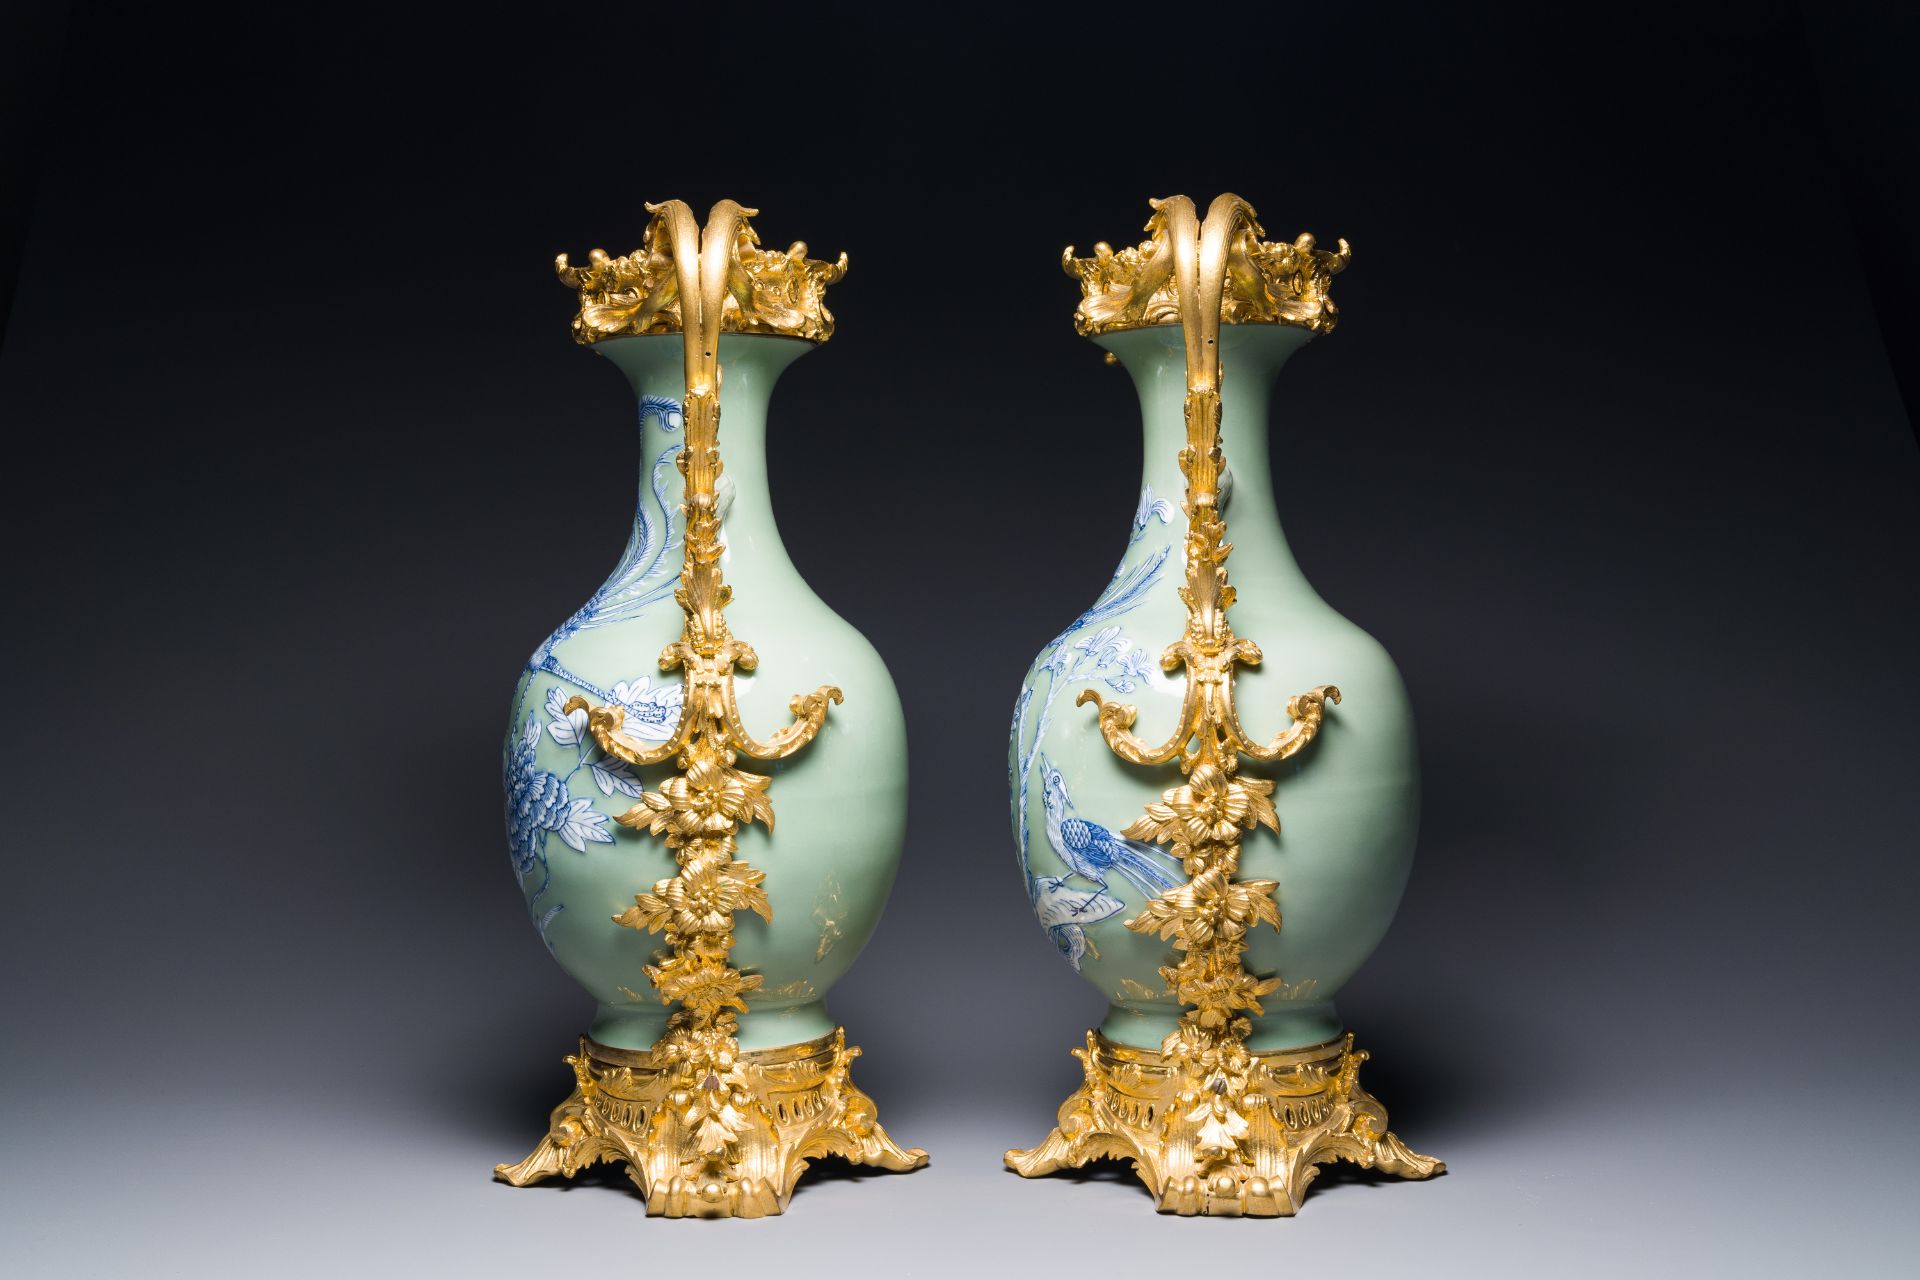 A pair of Chinese blue and white celadon vases with gilt bronze mounts, 19th C. - Image 2 of 6